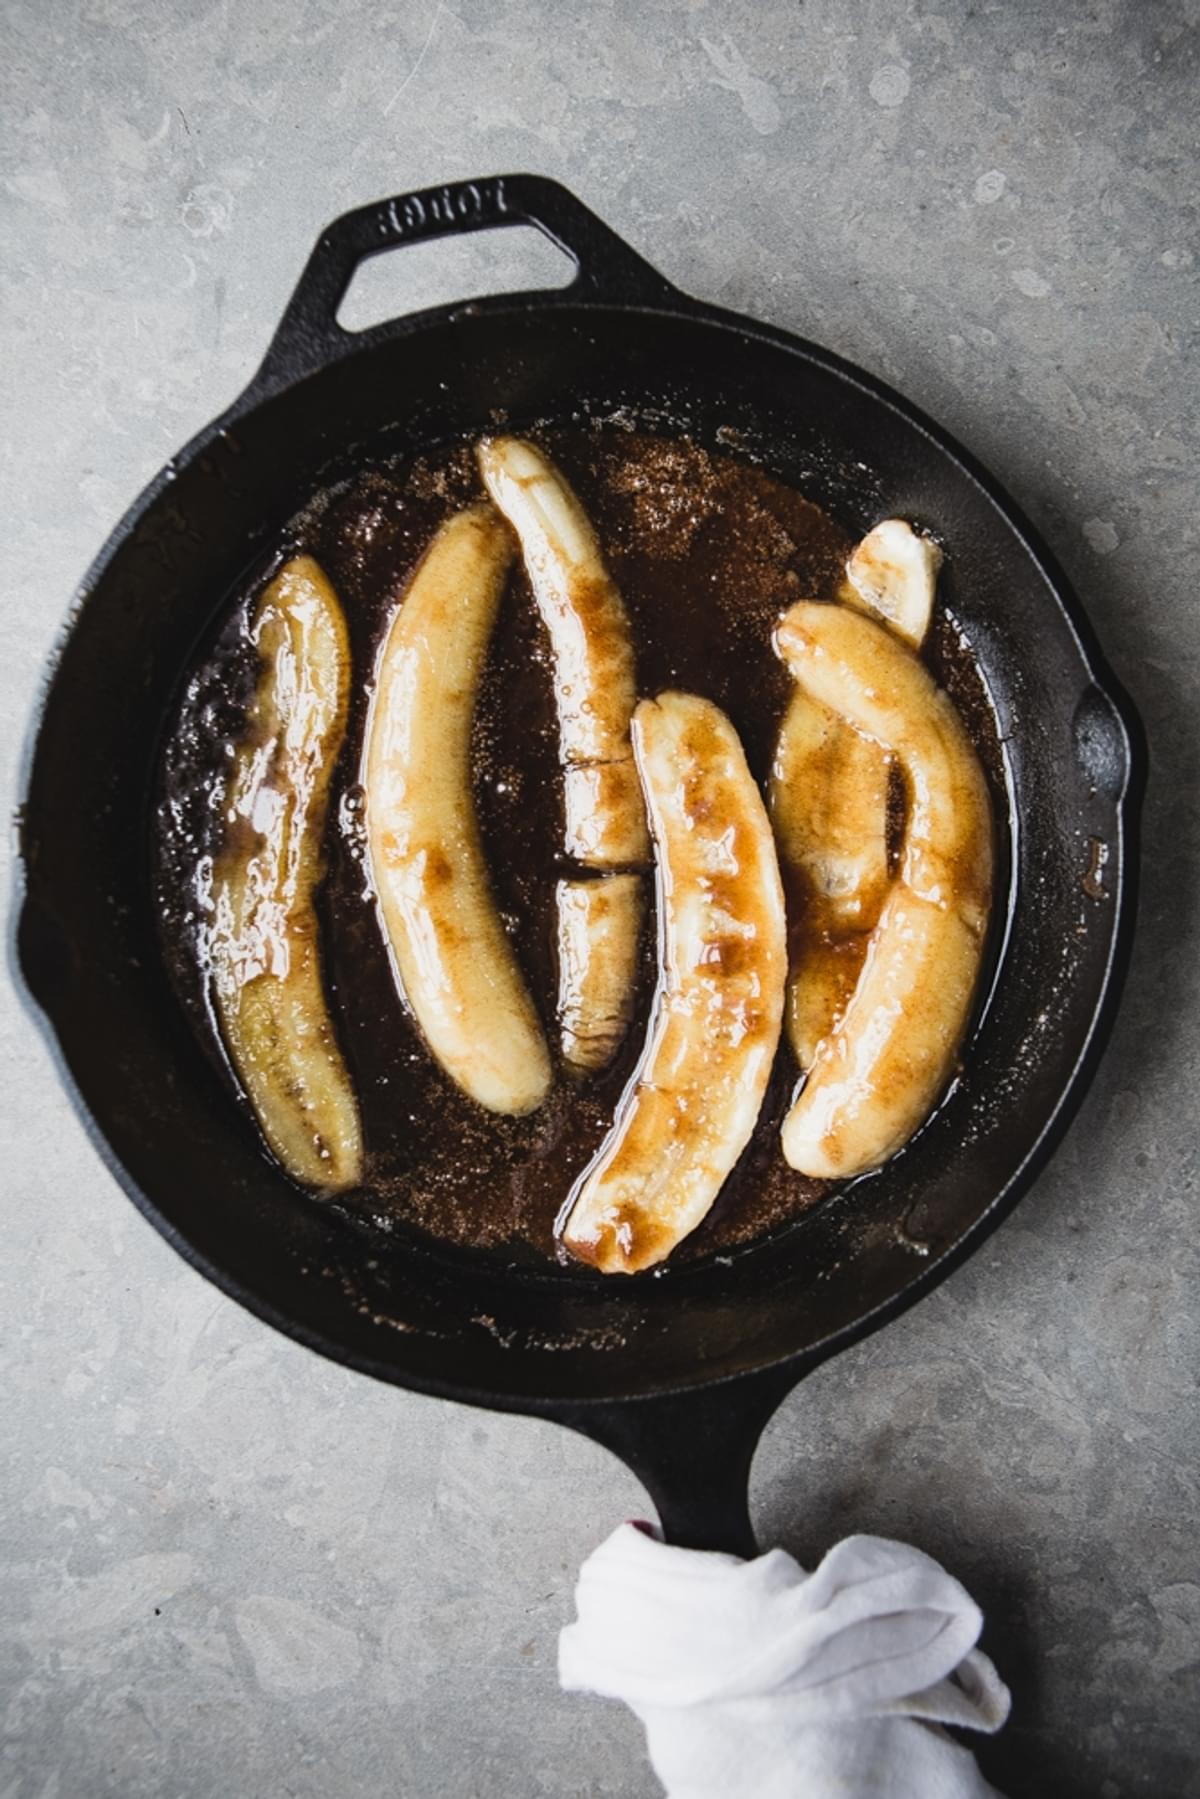 Bananas caramelizing in brown sugar in a cast iron skillet